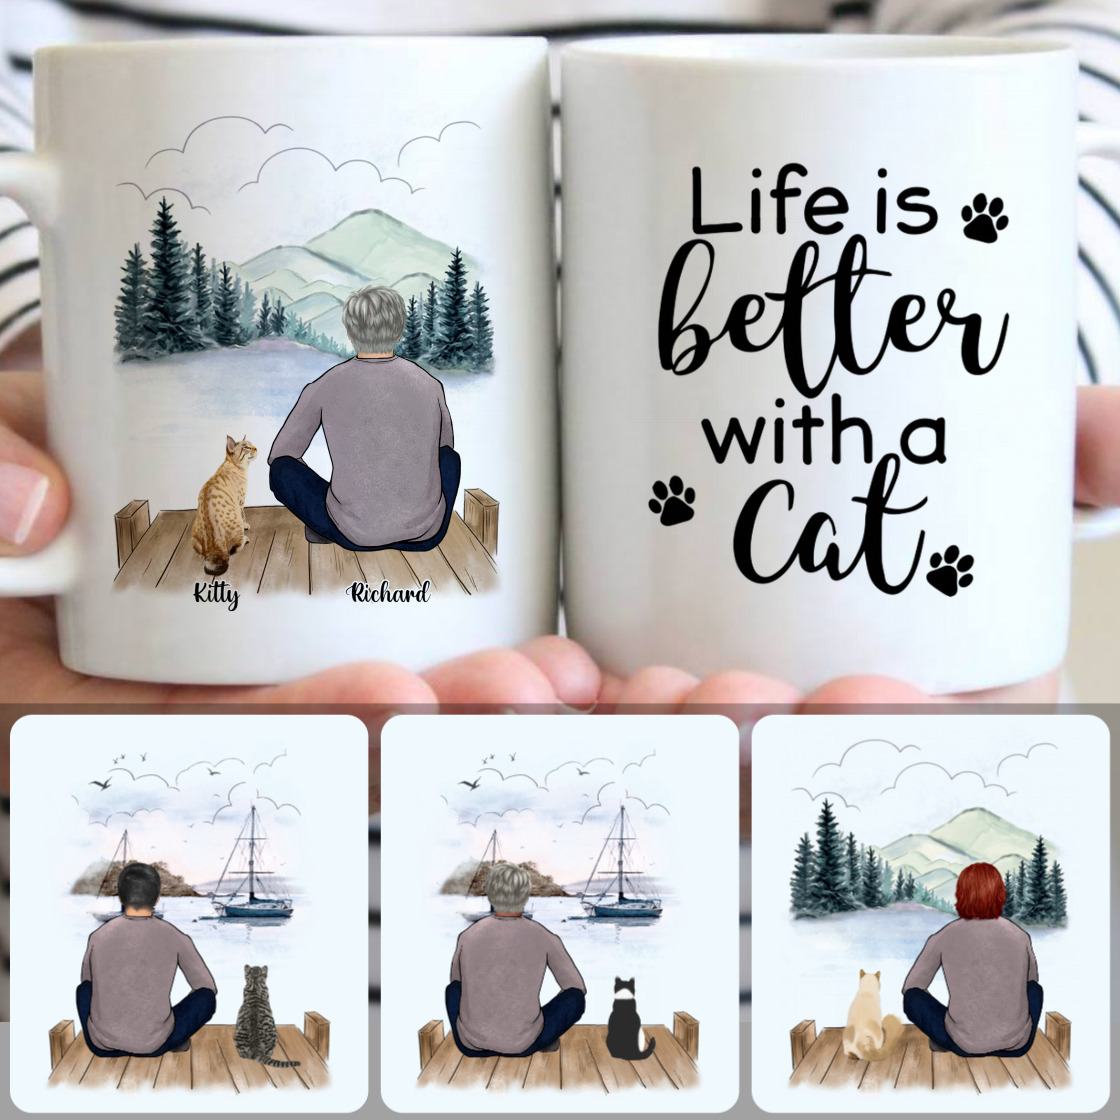 Personalized Mug, Creative Gifts For Best Friends Bestie, Man & Cat Customized Coffee Mug With Names